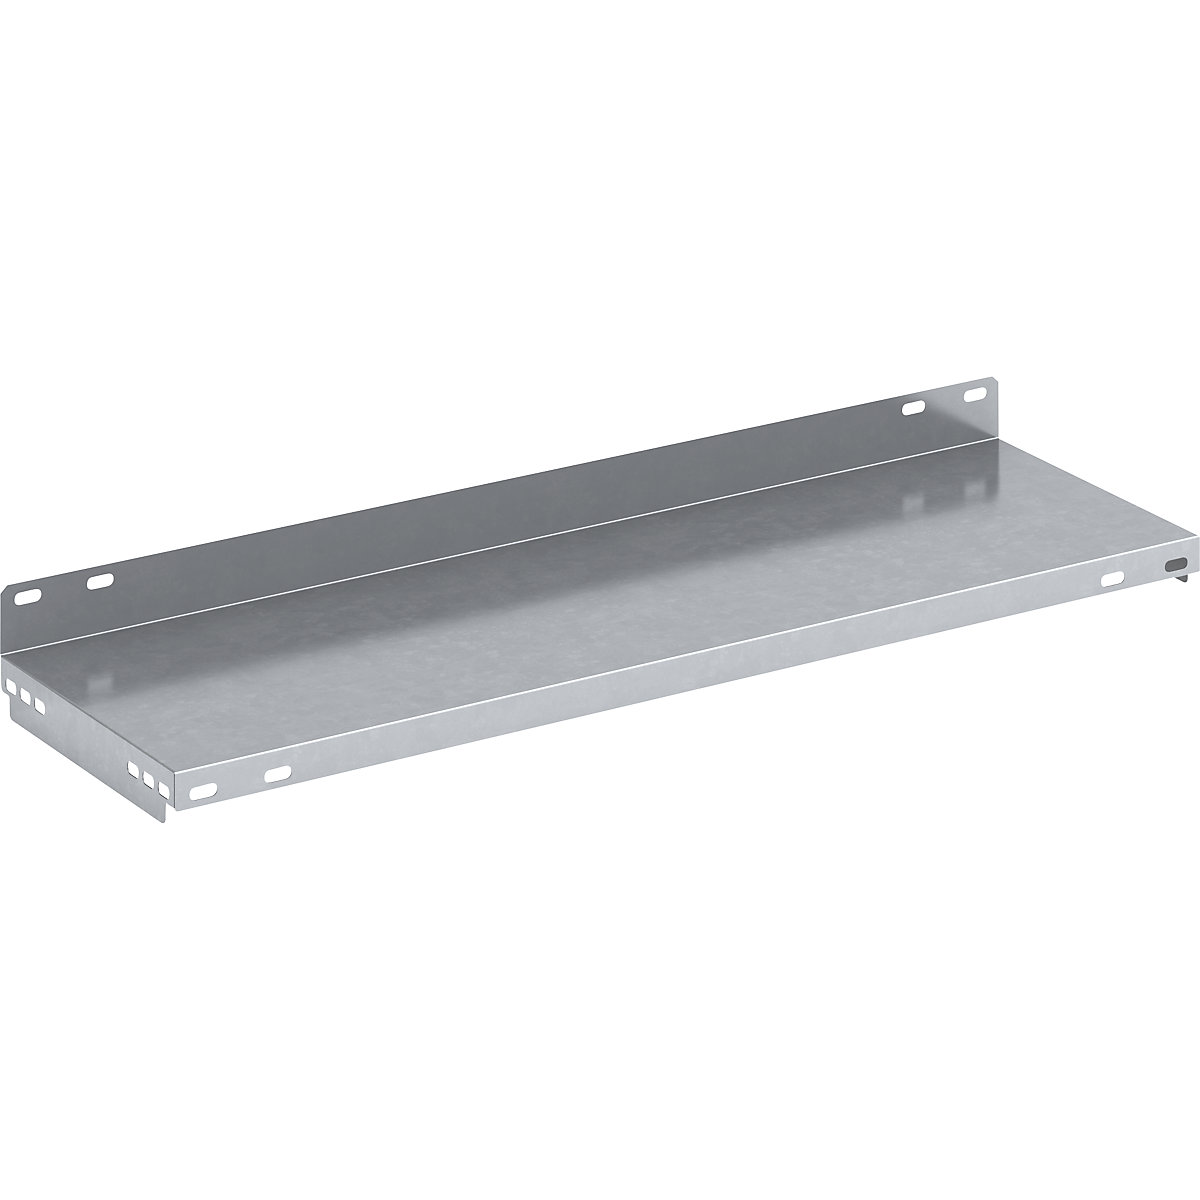 Shelf with supports - hofe